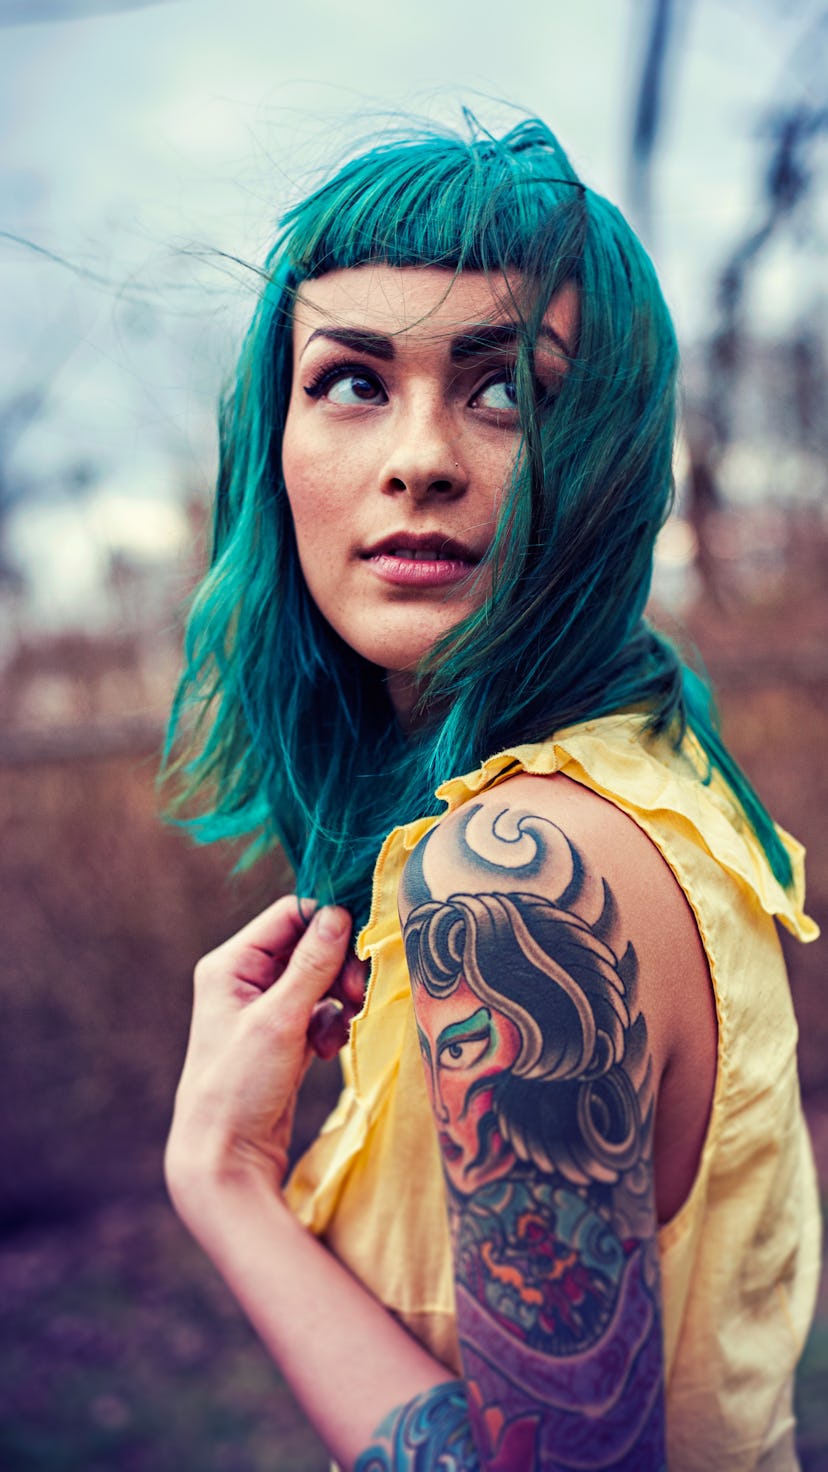 Tattooed model with blue hair posing for a photo in a yellow shirt